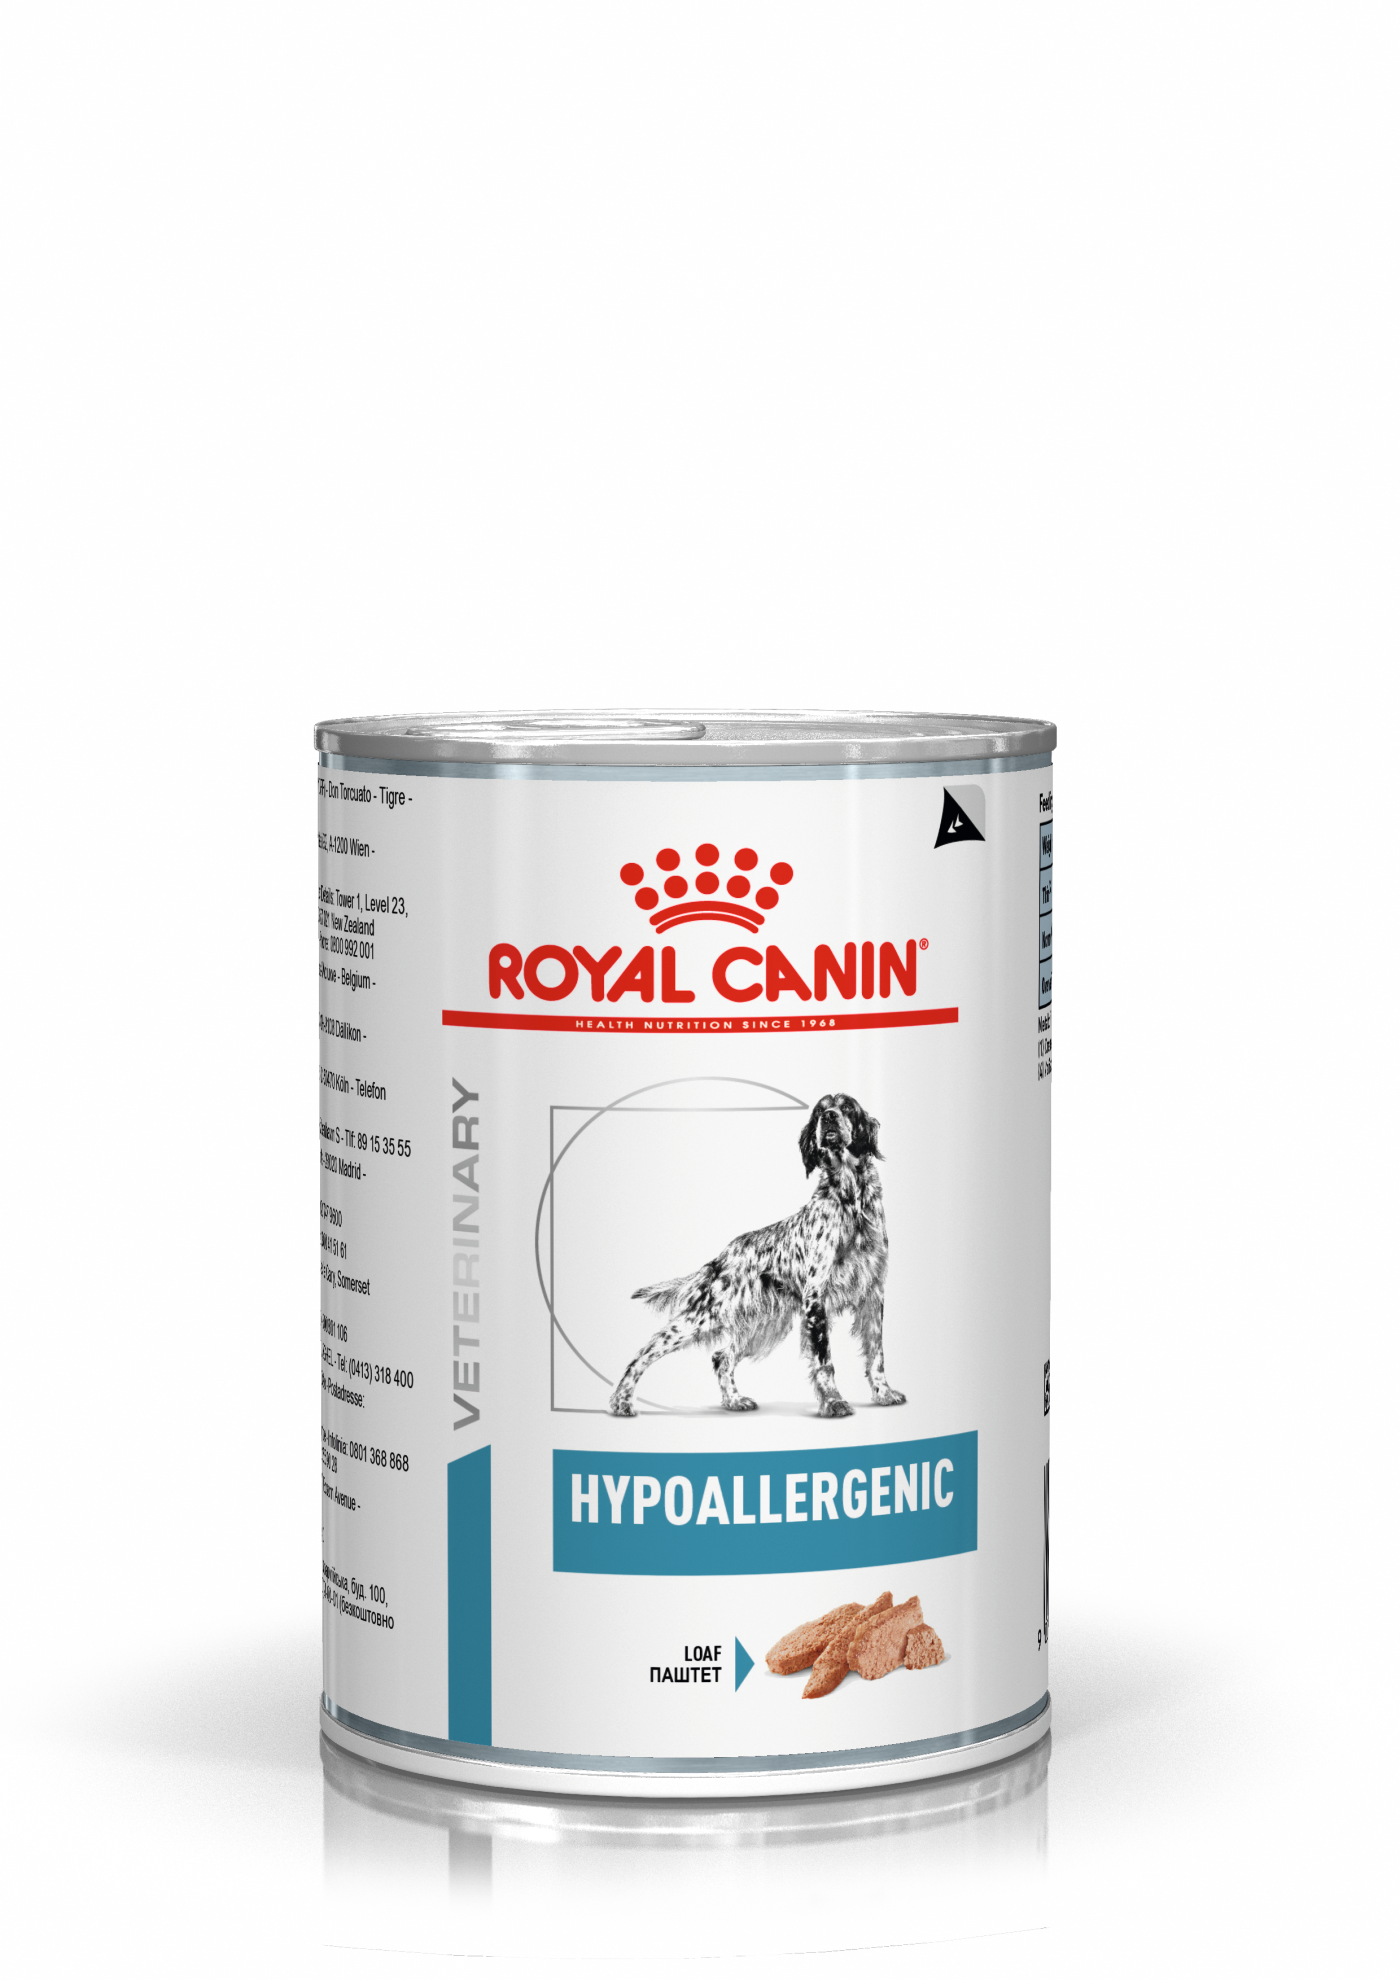 royal canin recovery dog food